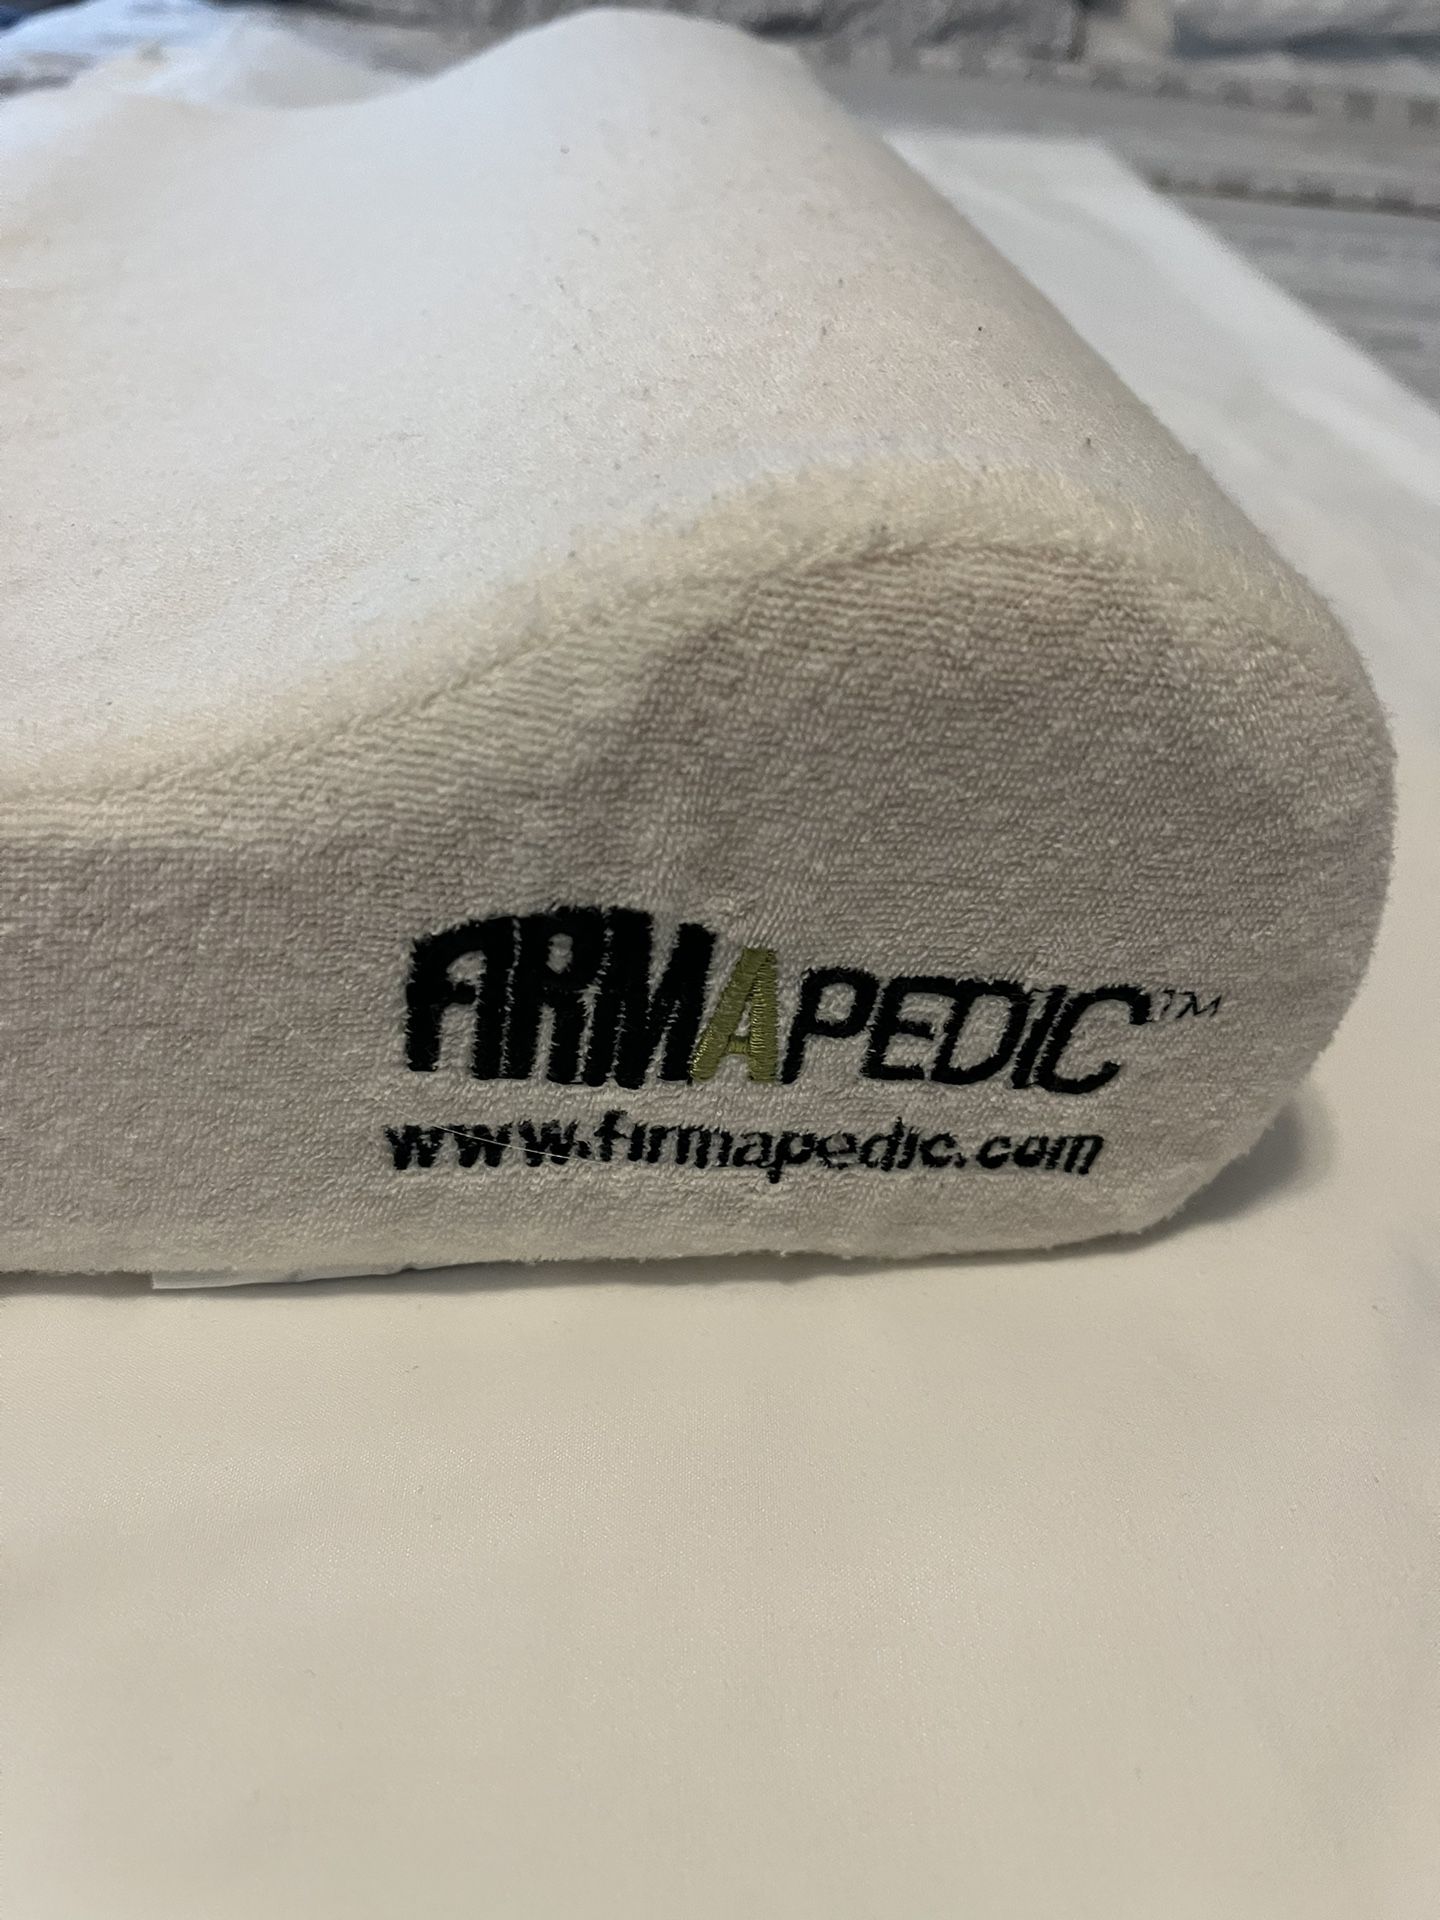 High Quality Foam And Pillow Stuffing for Sale in Olney, MD - OfferUp